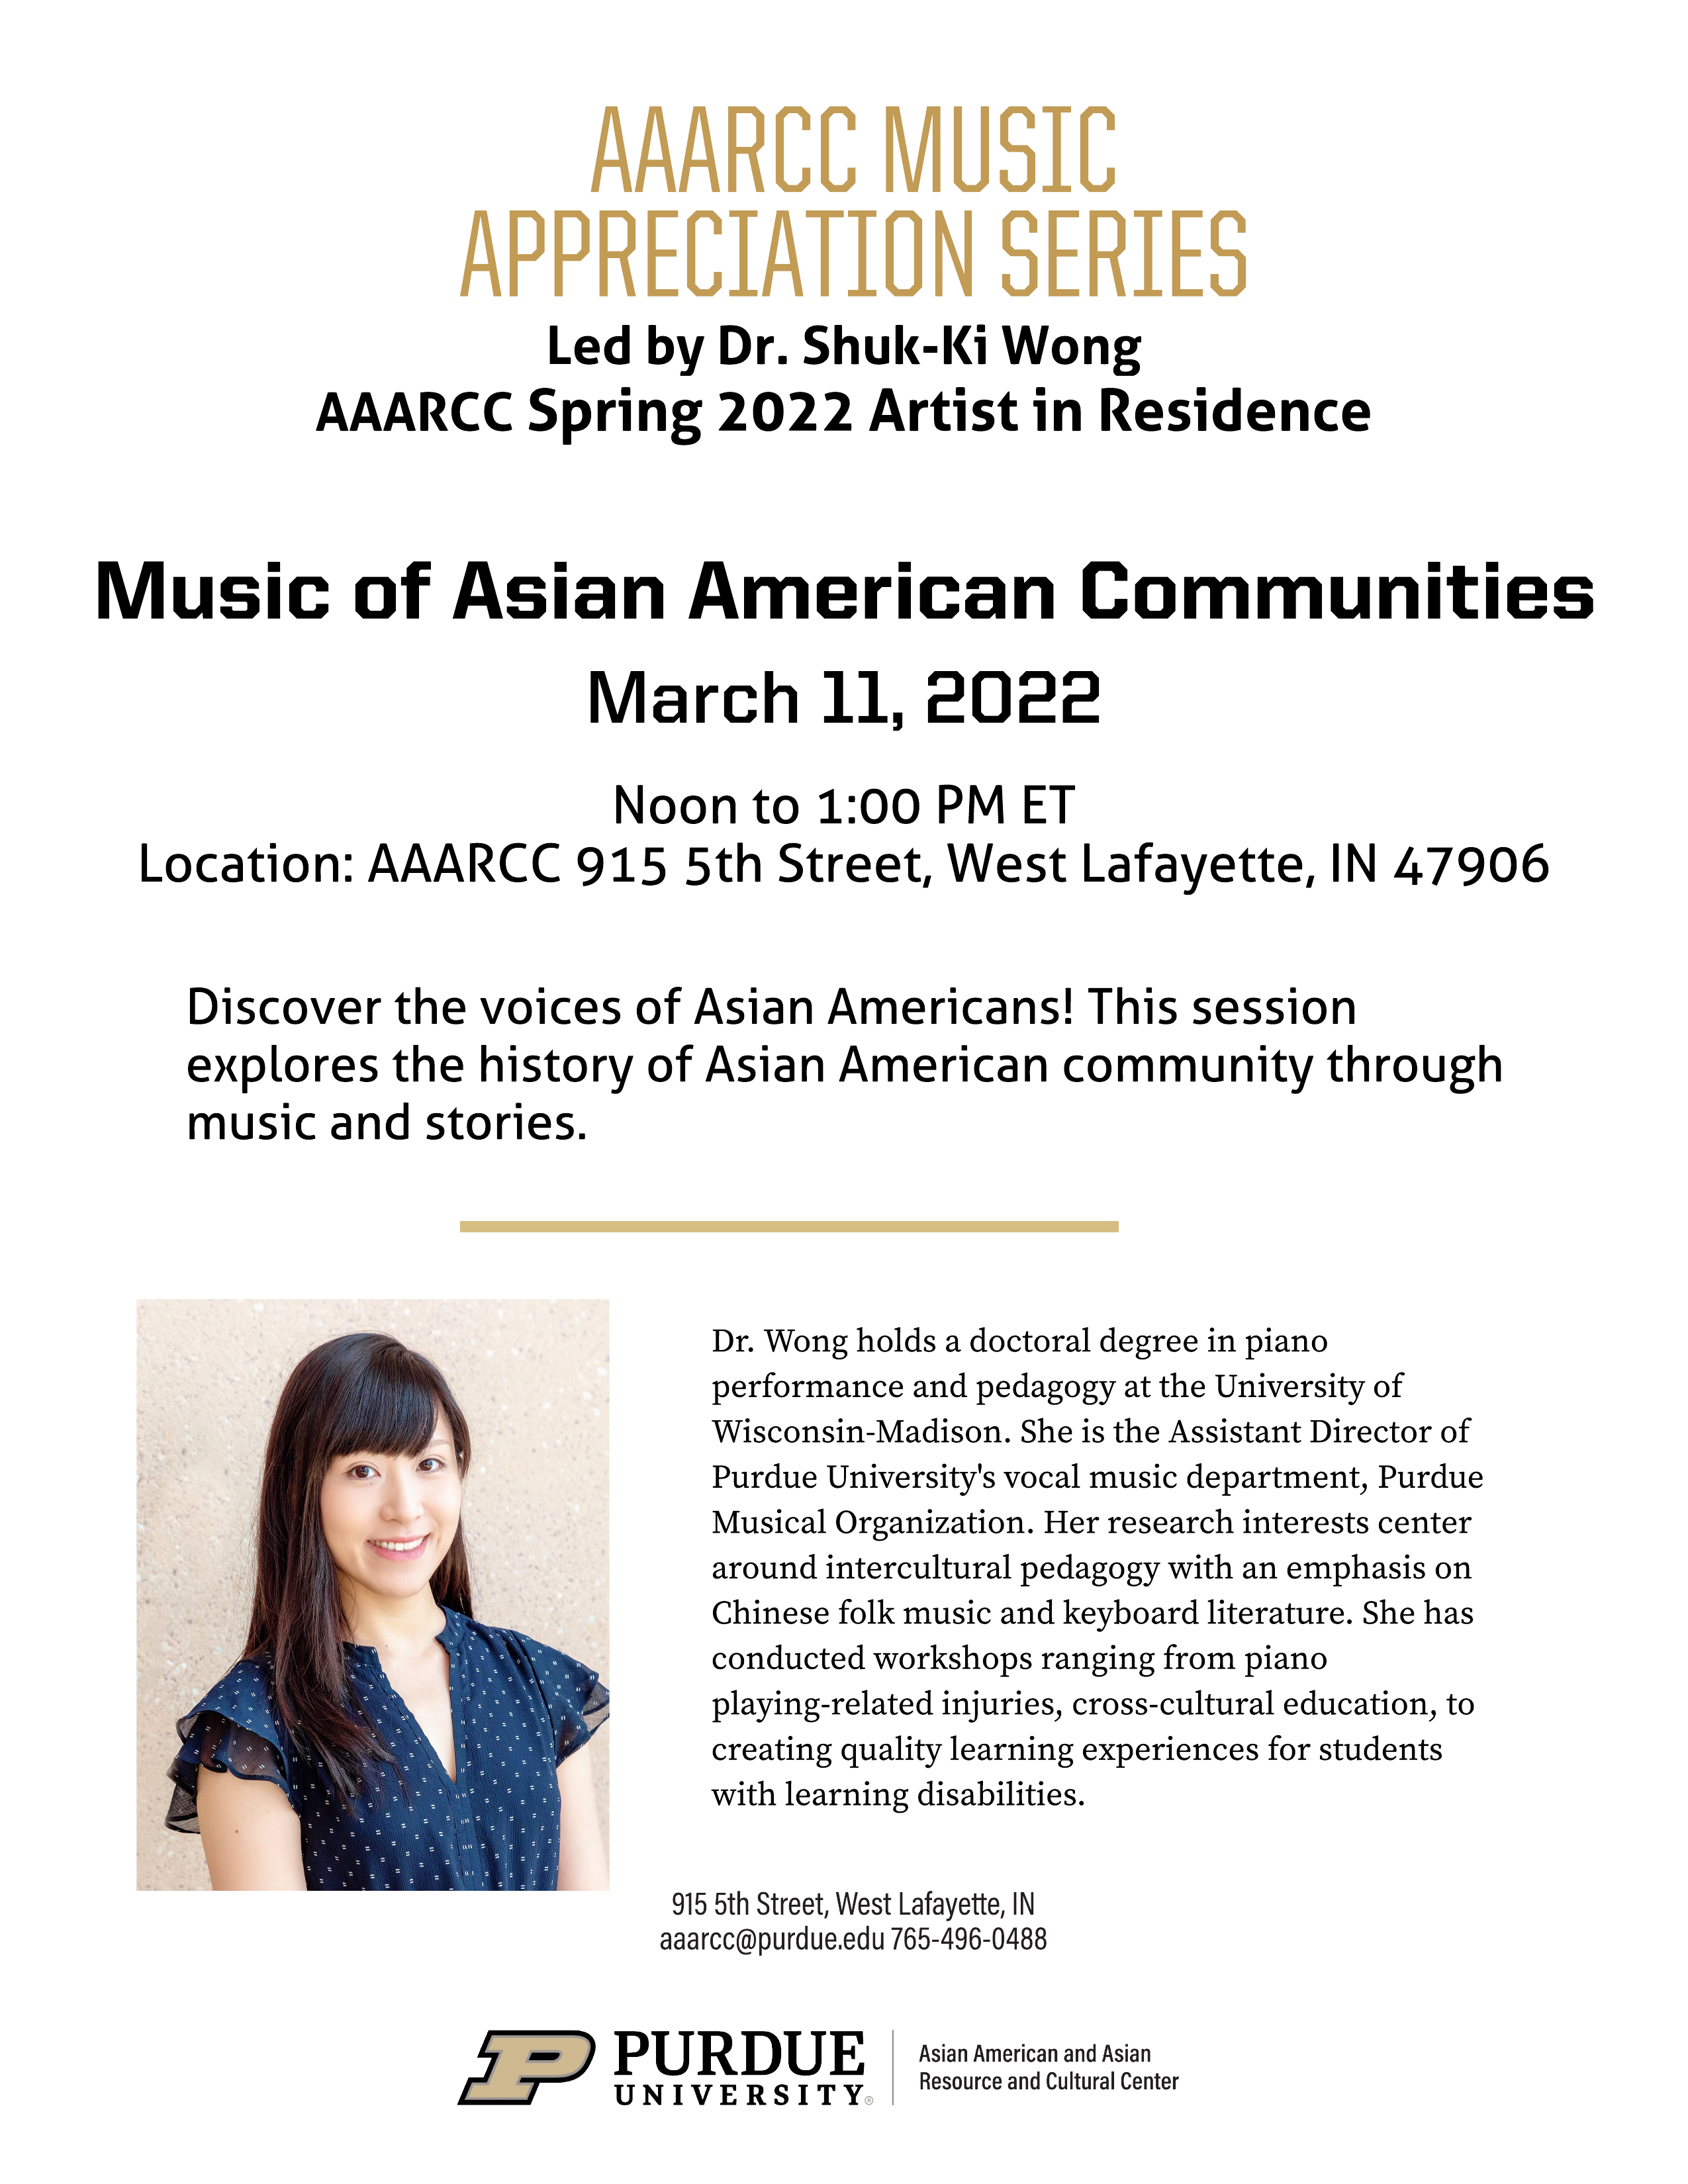 April 28, 2023 - InspirAsian: AAARCC Graduation and ASUB Multicultural  Showcase - Asian American and Asian Resource and Cultural Center - Purdue  University